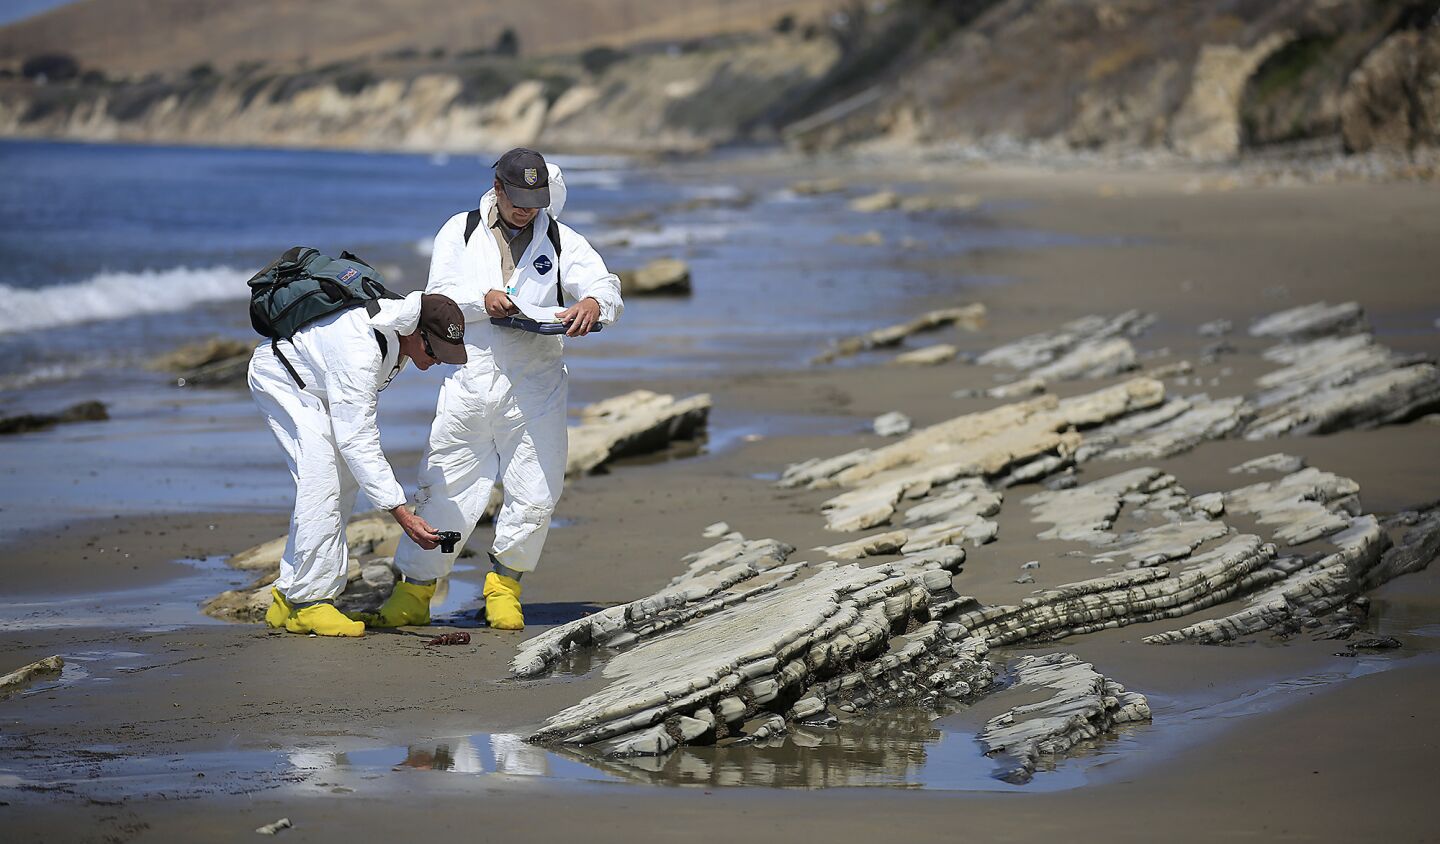 Scientists from the California Department of Fish and Wildlife and the UCSB Marine Science Institute conduct natural resource damage assessments in the aftermath of the oil spill on the Gaviota coast.